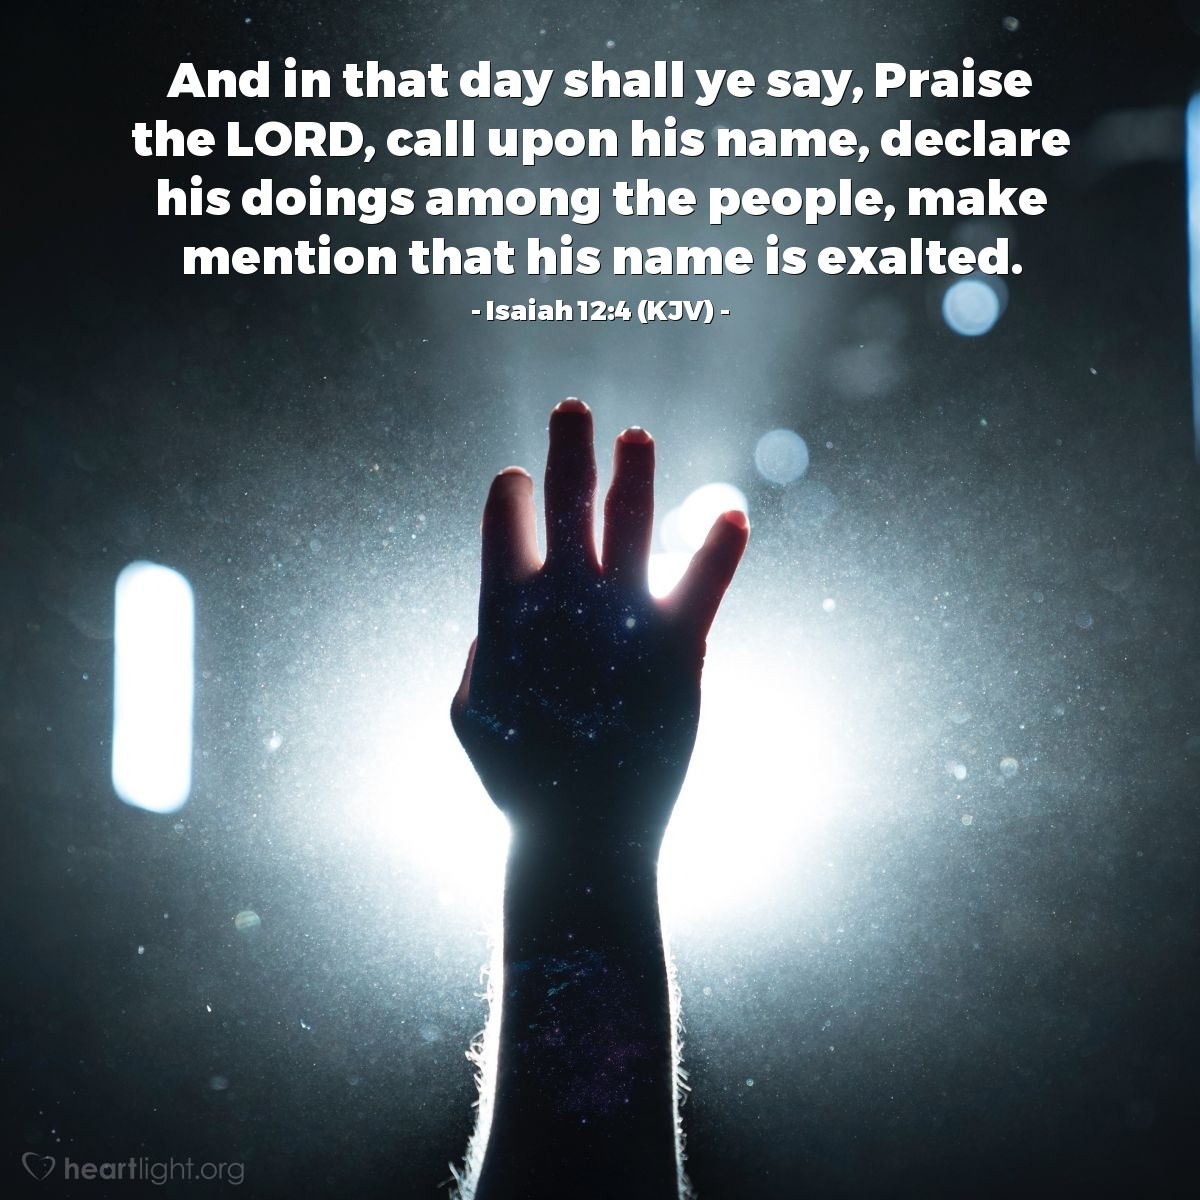 Illustration of Isaiah 12:4 (KJV) — And in that day shall ye say, Praise the LORD, call upon his name, declare his doings among the people, make mention that his name is exalted.